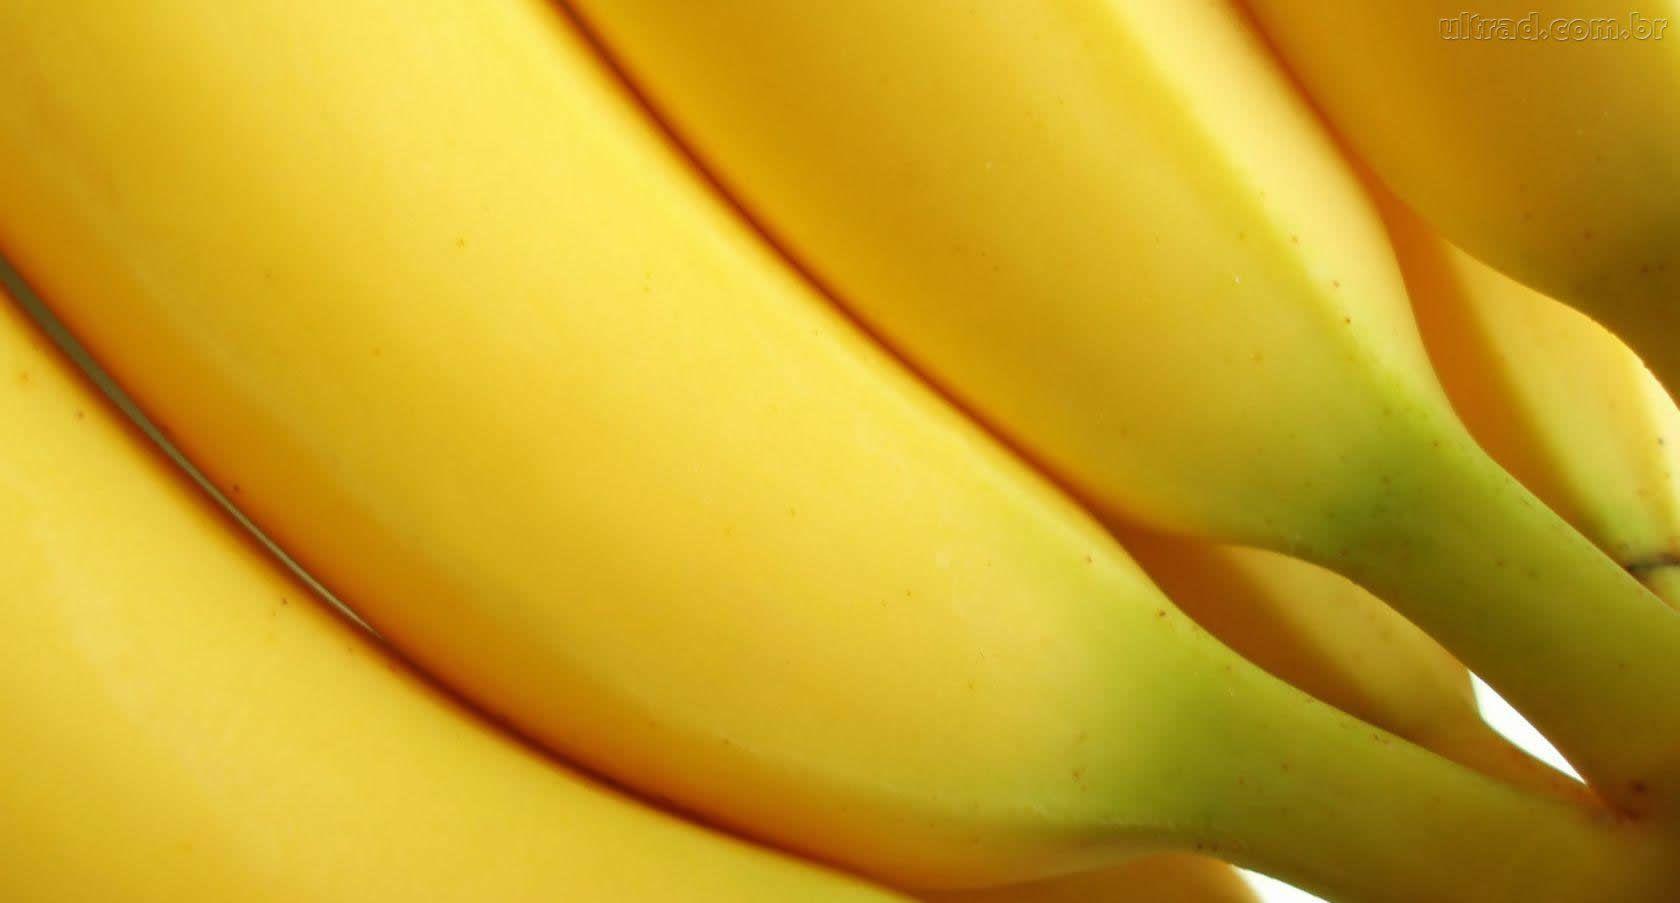 Banana HD Wallpaper Background For Free Download, B.SCB